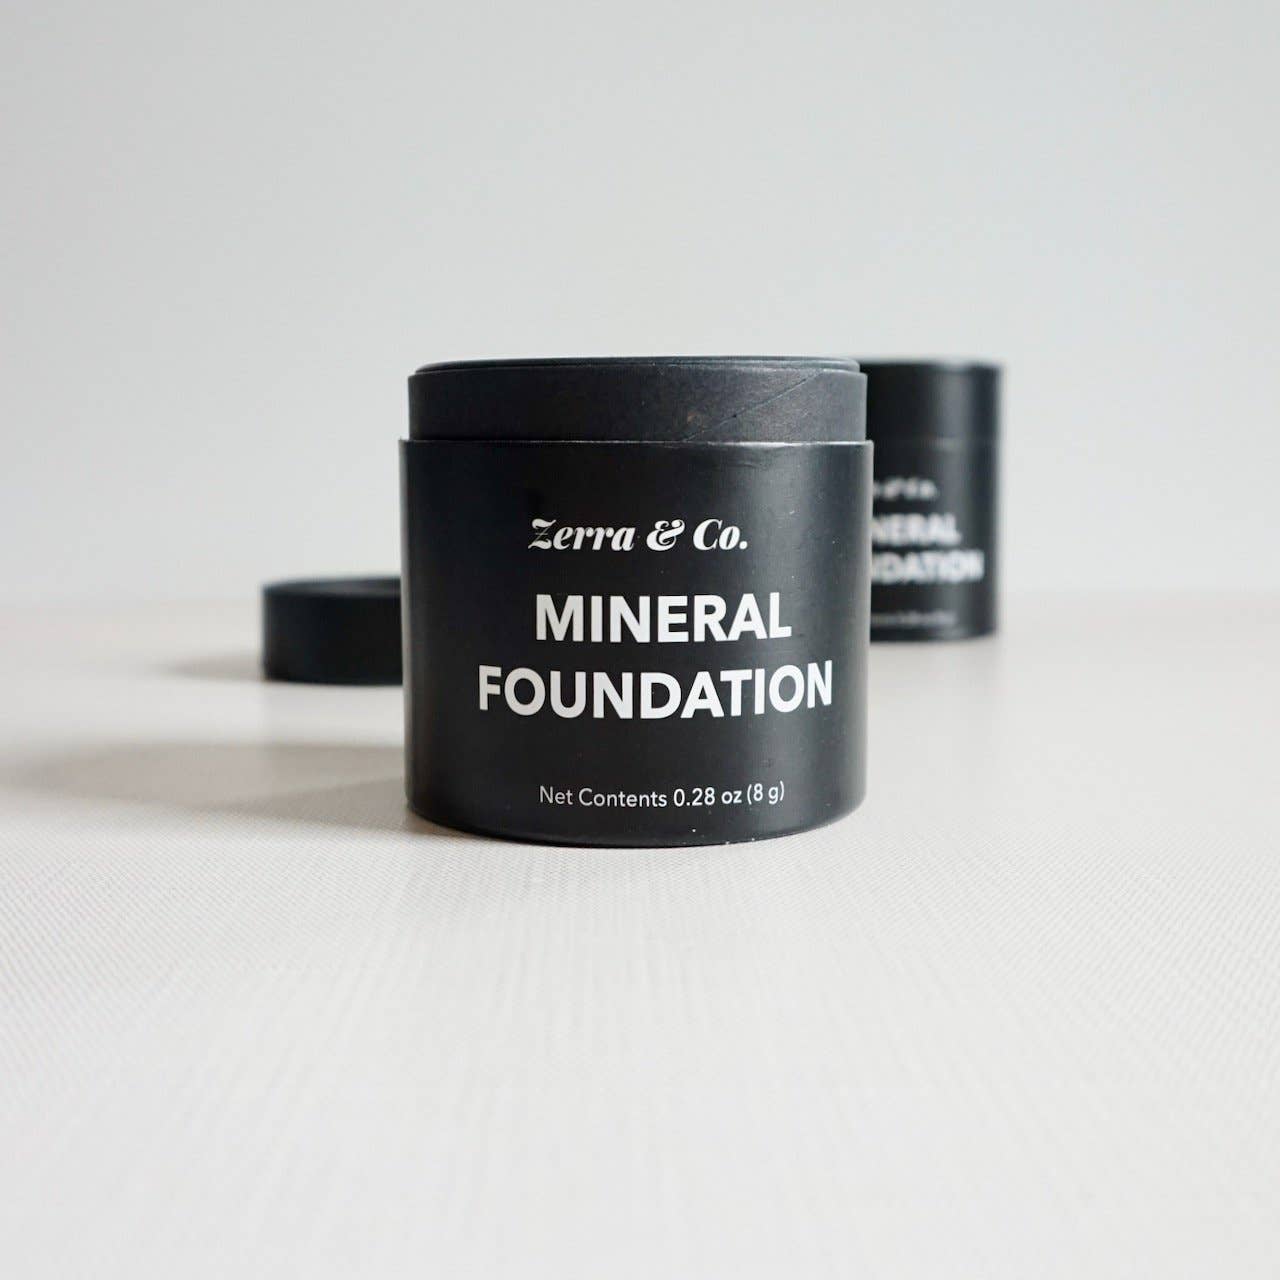 Mineral Foundation Toffee Zerra & Co.